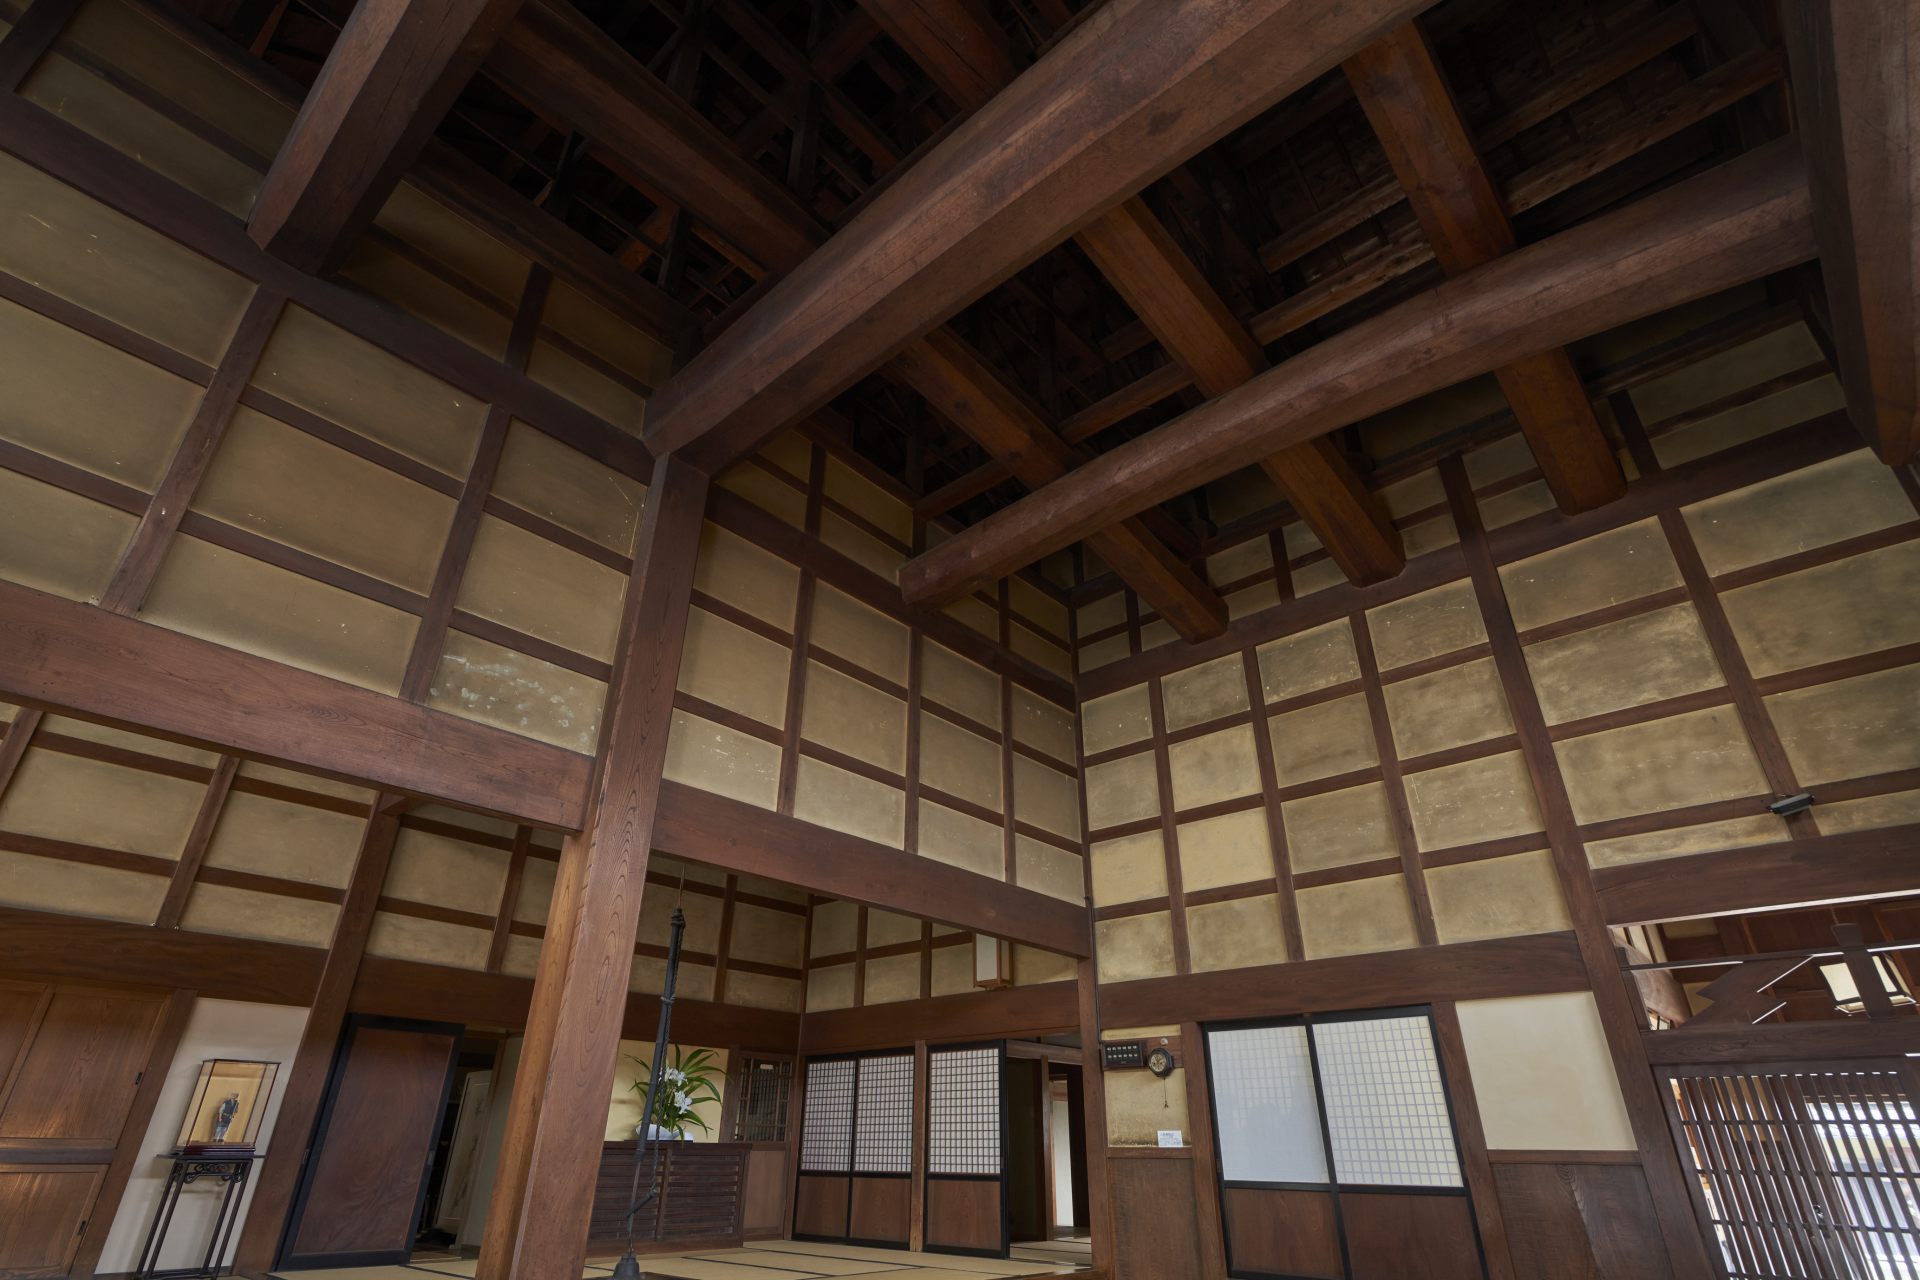 See the skills and sophistication of Japanese traditional architecture in every corner at Ishitani Residence.